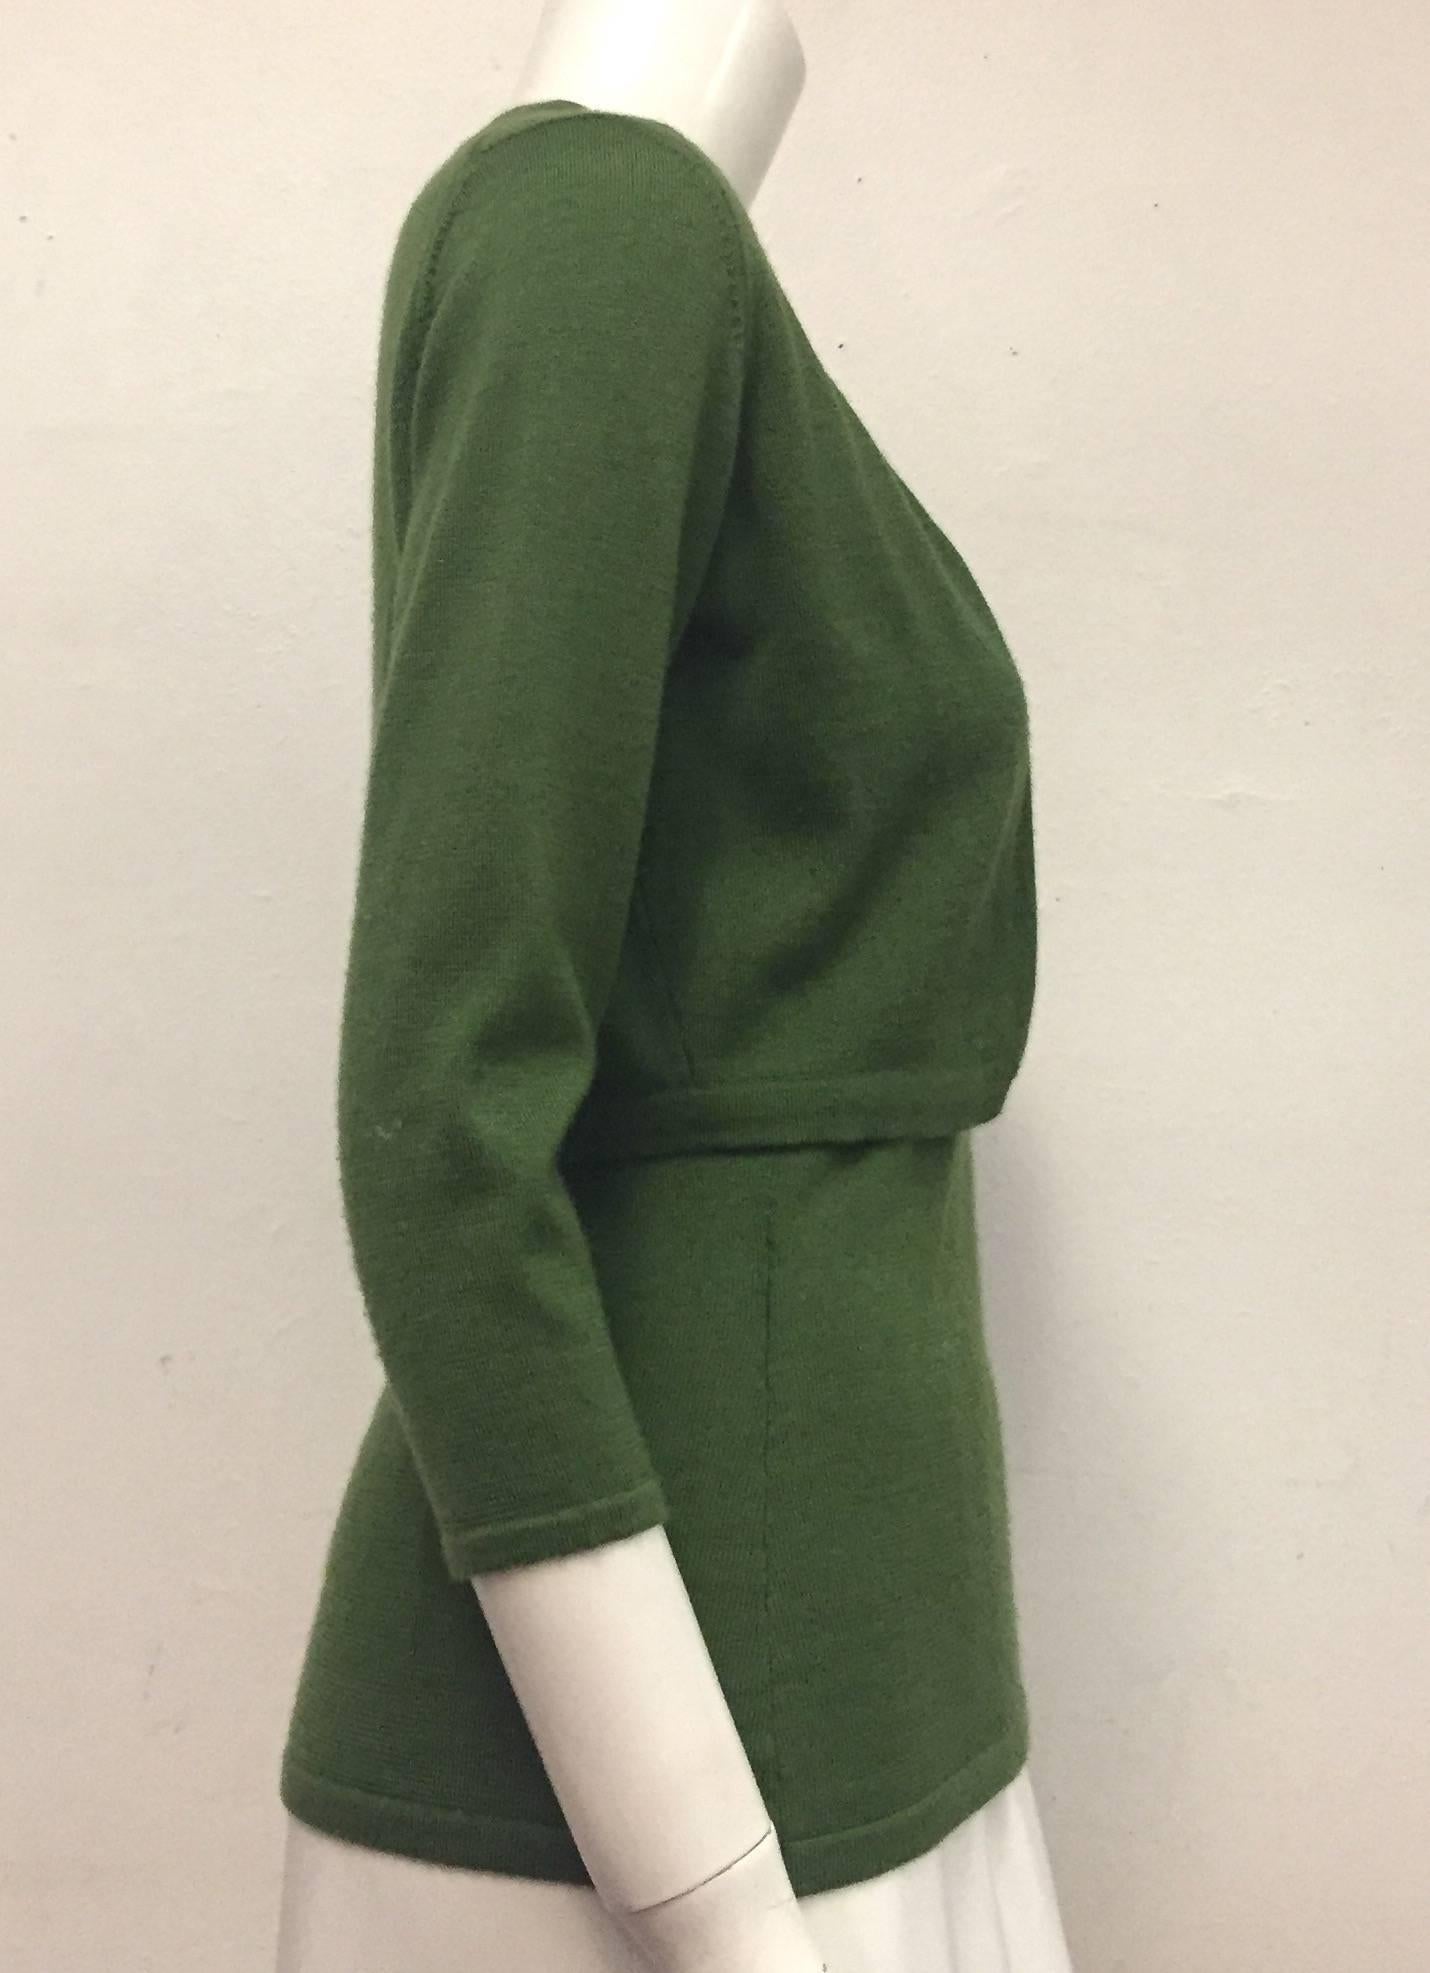 Oscar de la Renta's autumn green cashmere and silk, knit twin set is wonderful for fall and winter.  This set is ribbed on neck lines, sleeve openings, hems and cuffs.  The vest is sleeveless.  Bolero has 3/4 sleeves and 4 way stretch fabrication